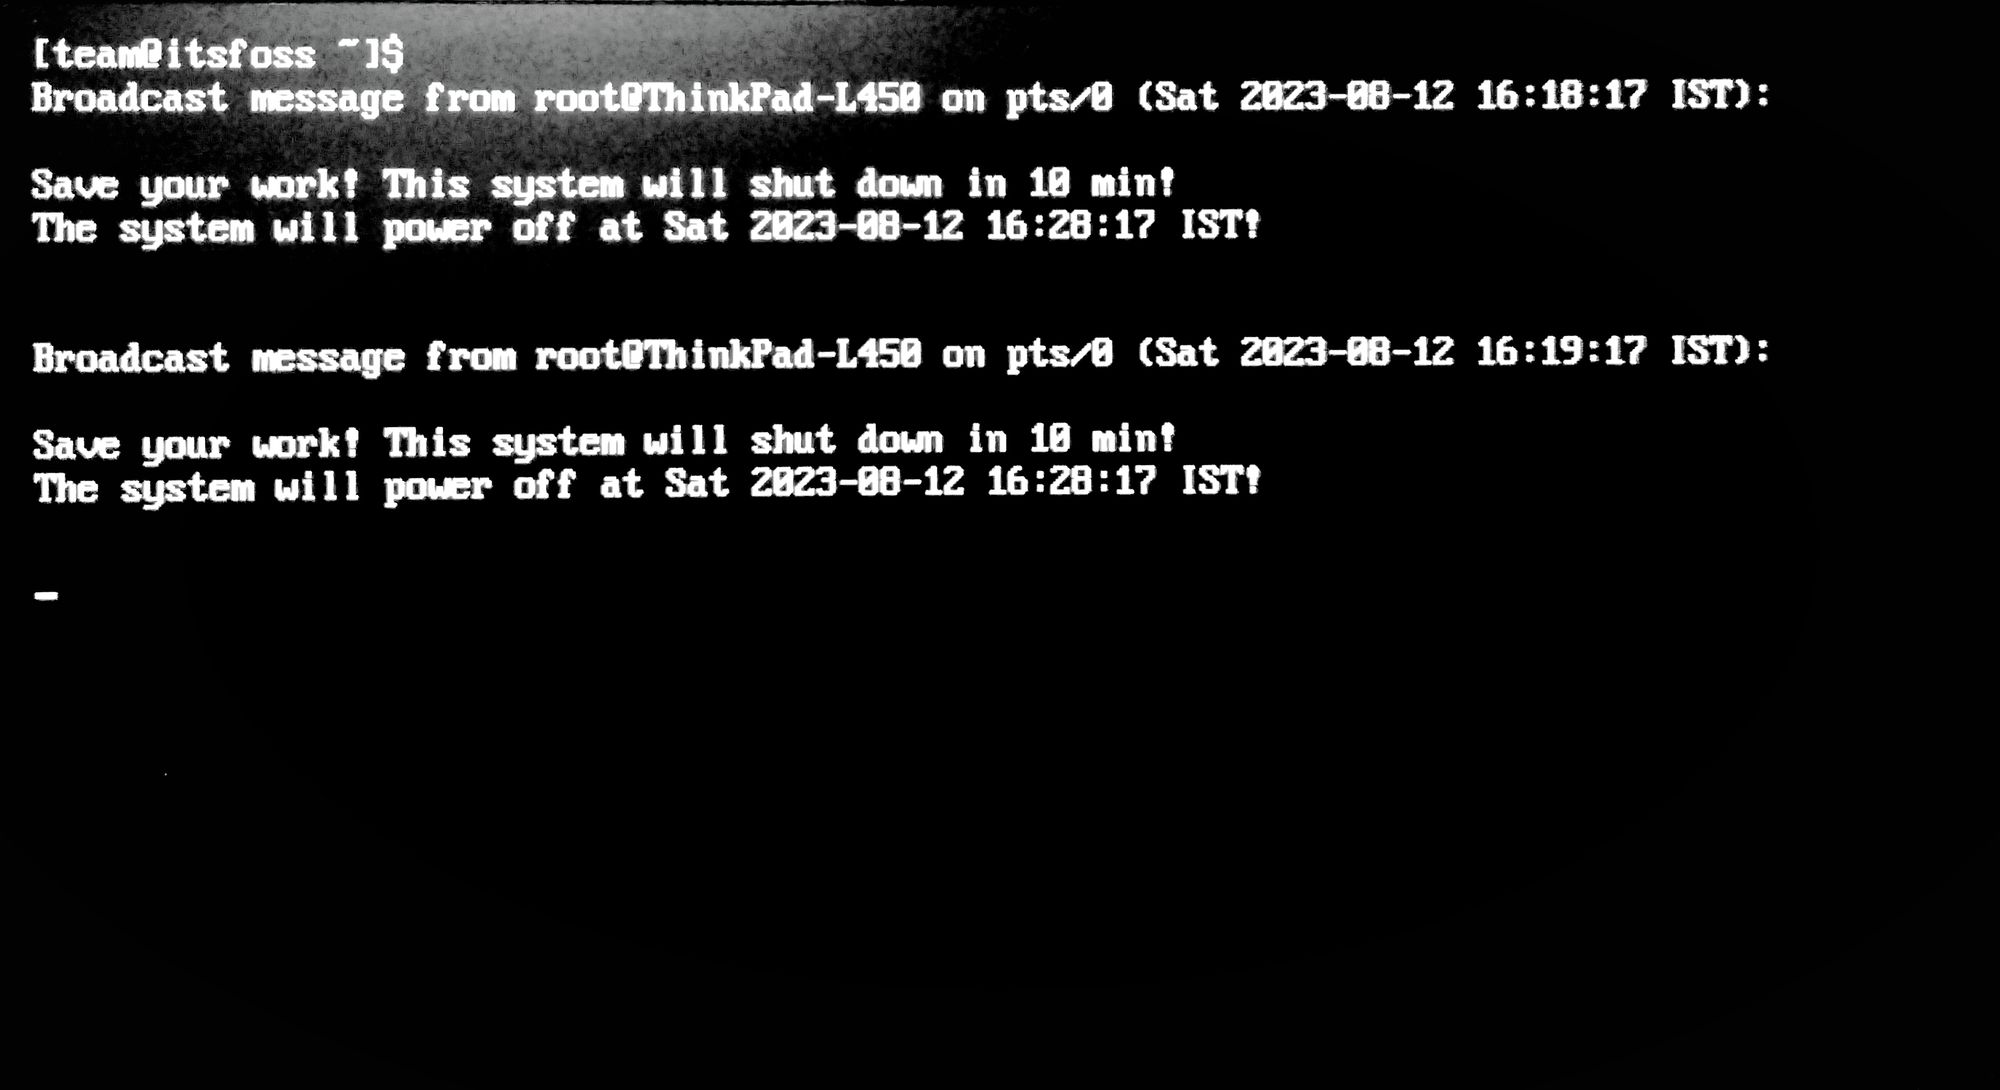 Message shown in TTY every minute after execution of command